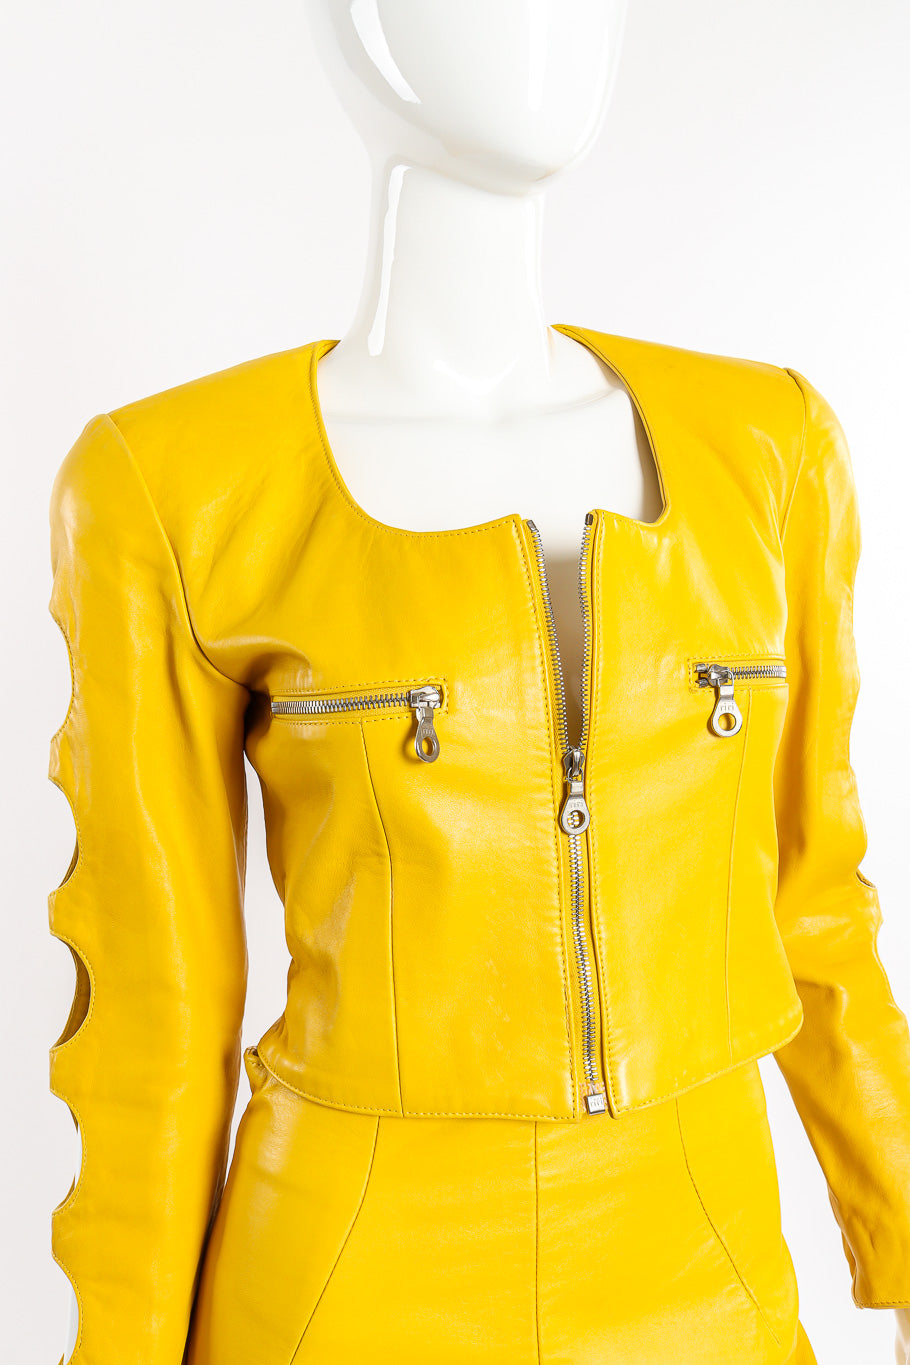 Vintage North Beach Cutout Leather Jacket and Skirt Set front view of jacket on mannequin closeup @Recessla